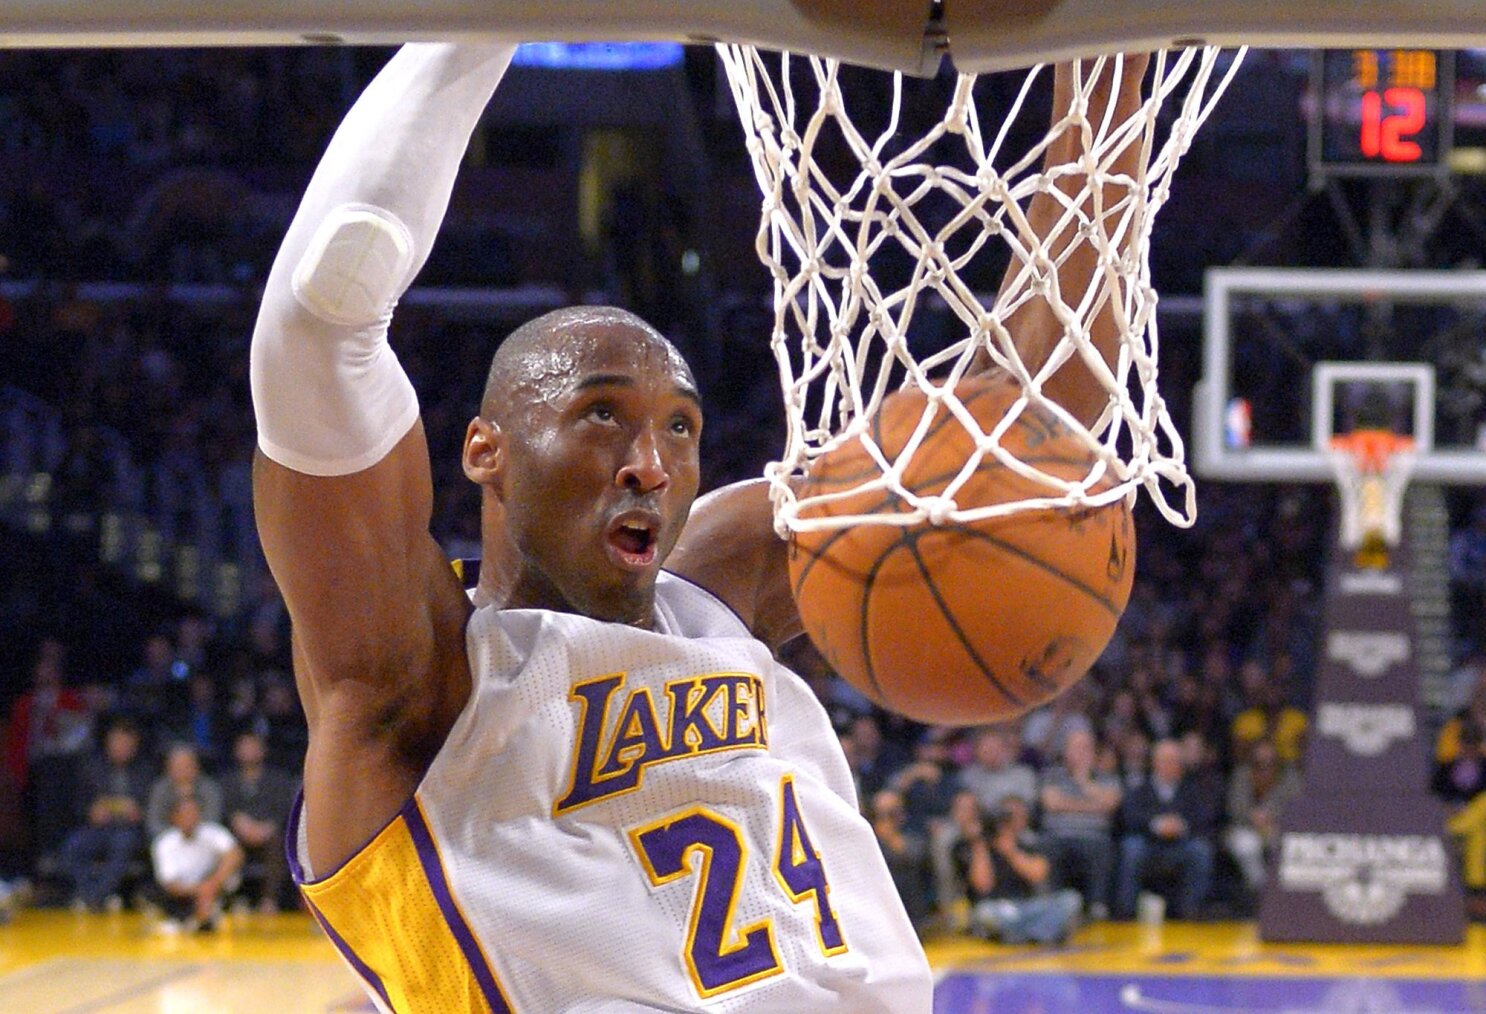 Kobe Bryant, NBA superstar and future Hall of Famer, is dead at 41